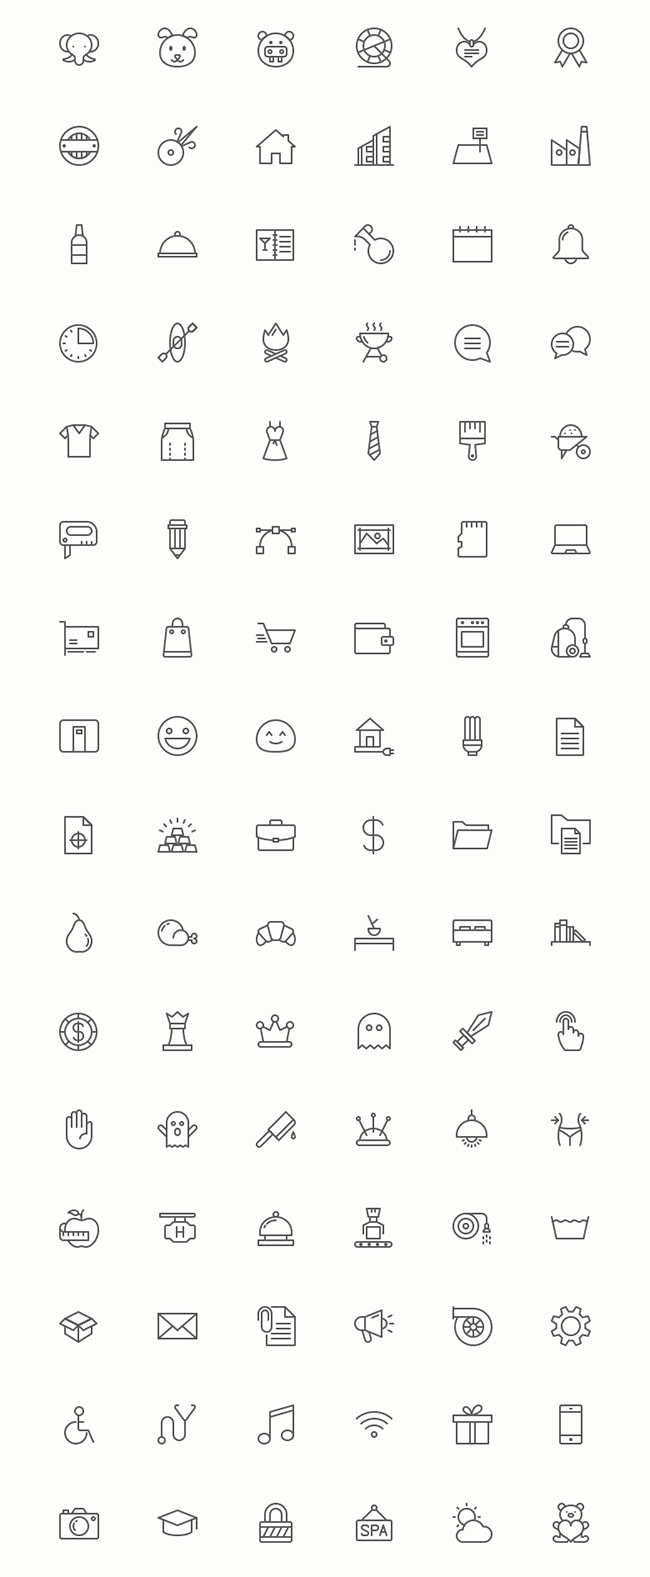 96-Slimicons-Minimalistic-Line-Vector-Icons